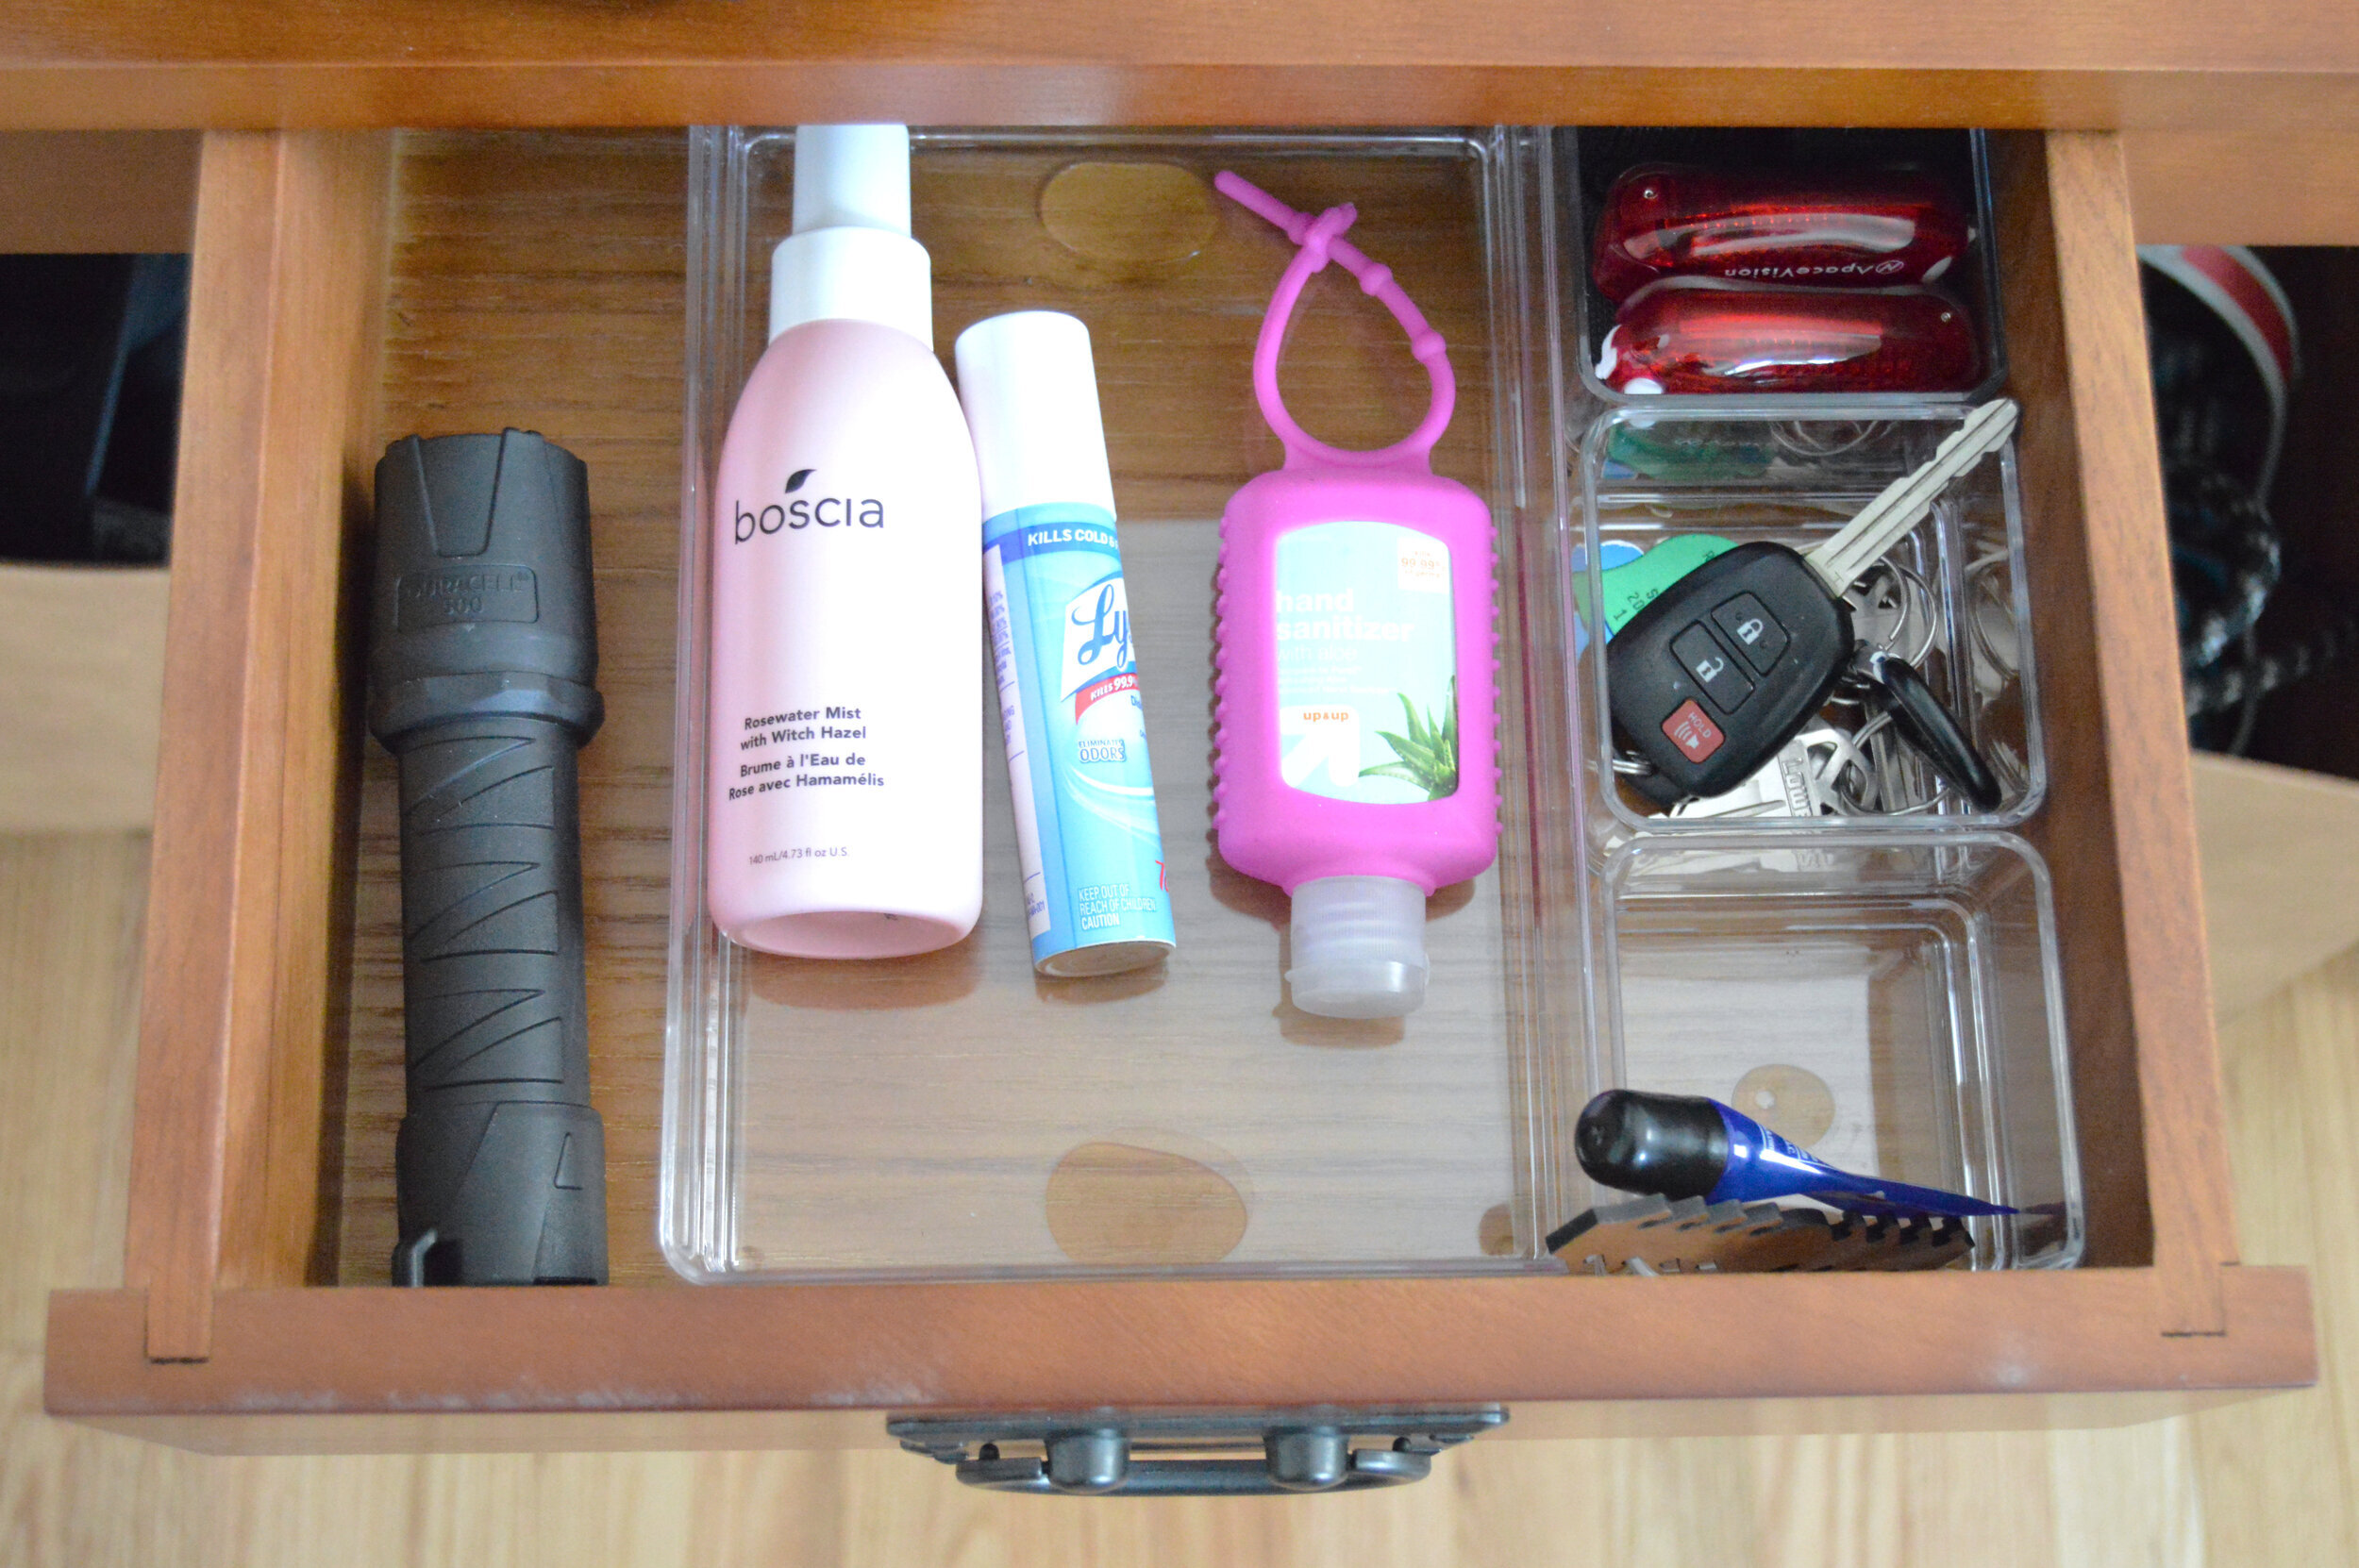 How to Keep Your Drawer Organizers From Sliding Around Your Nice, Organized  Drawers — This You Need — An Almanac For The 21st Century